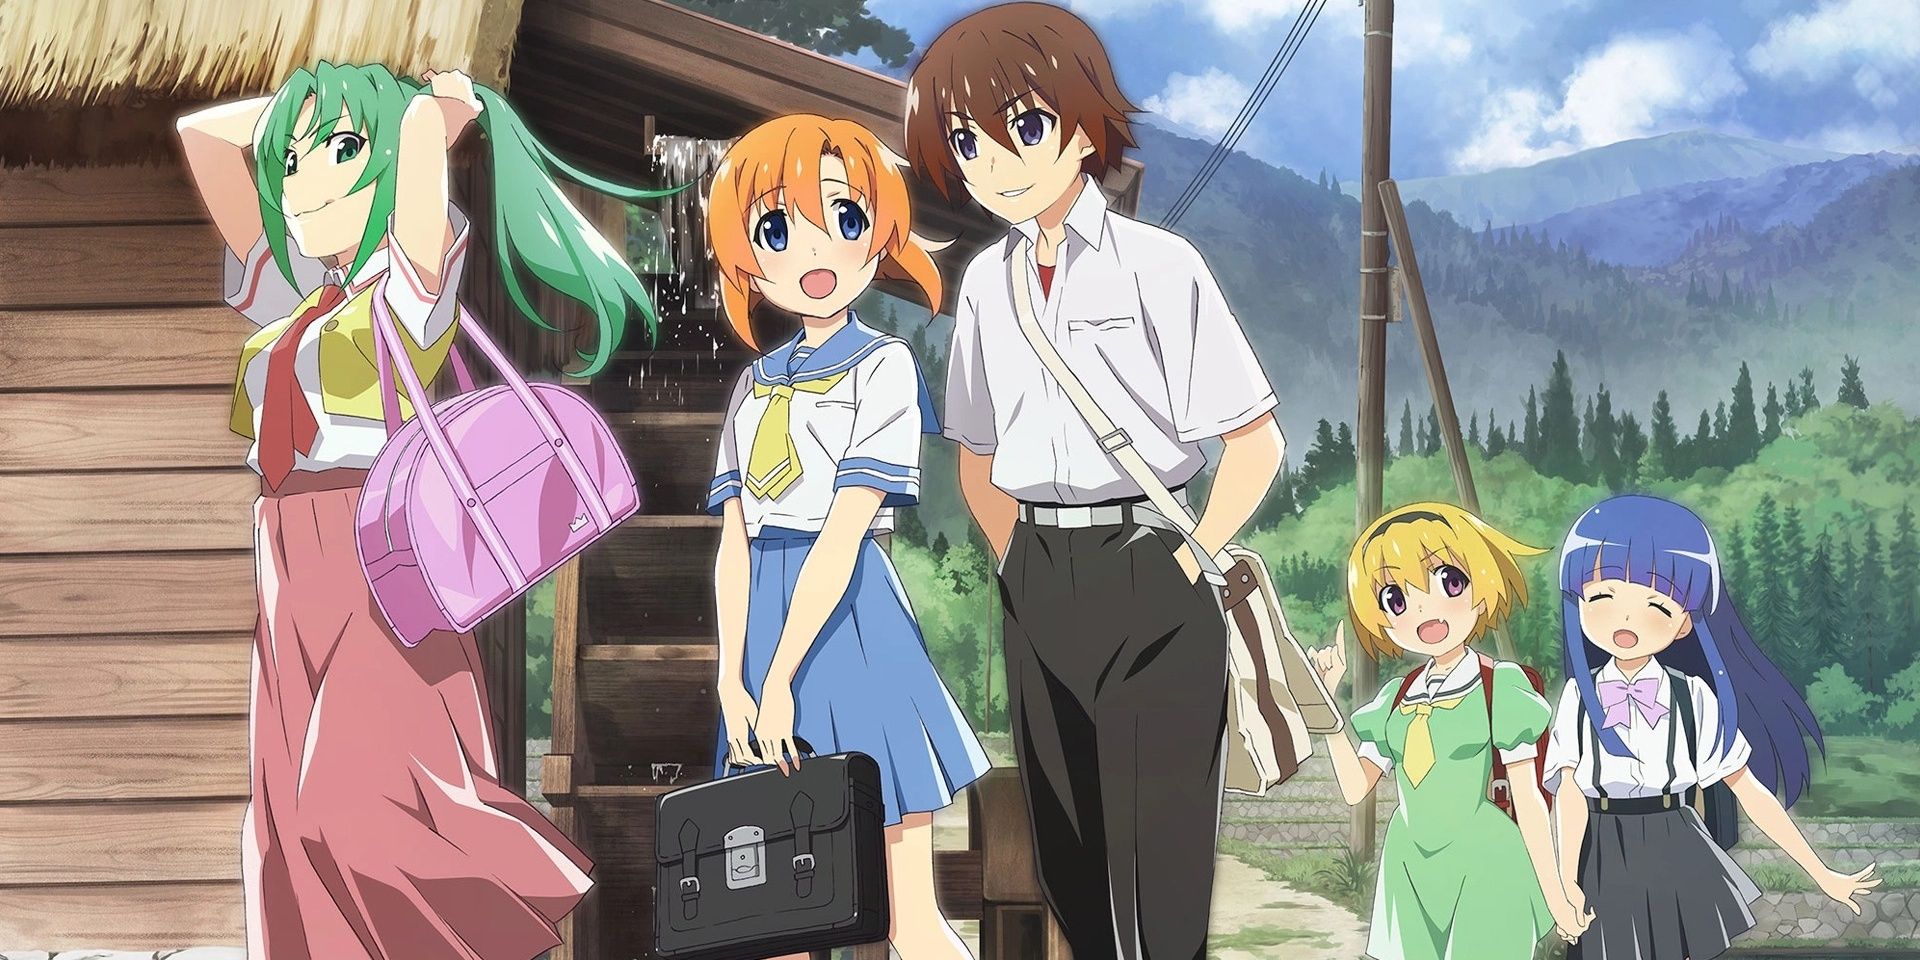 The main cast of Higurashi When They Cry on their way to school.